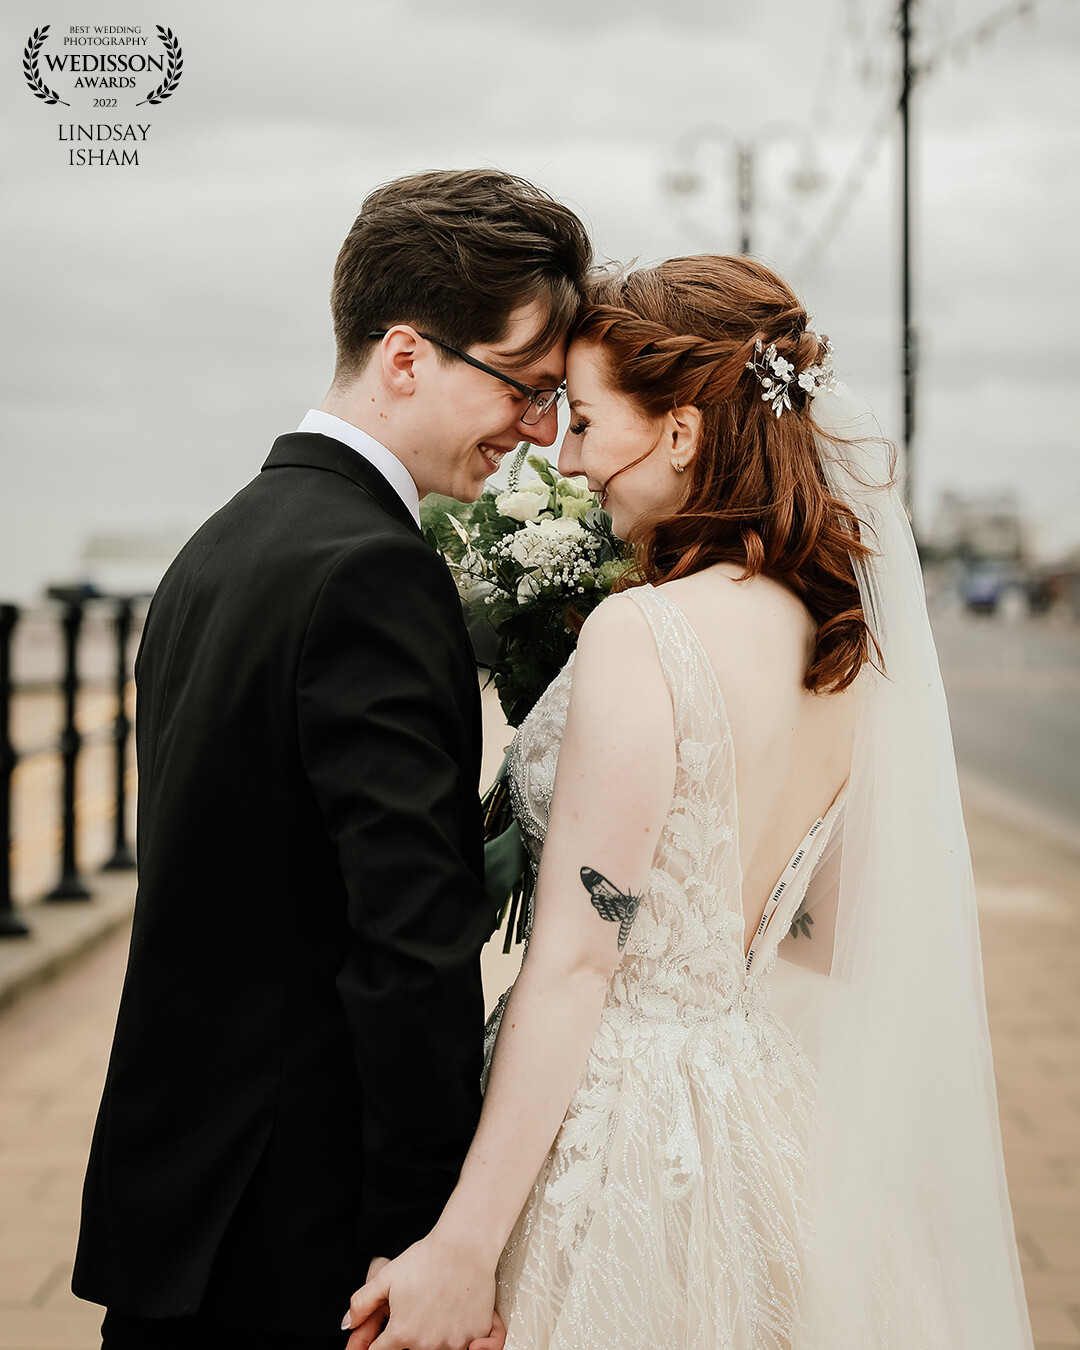 These two were simply adorable on their wedding day!  So incredibly natural in front of the camera, with Cleethorpes Promenade as their backdrop.  They couldn't wait to be married!  Gareth & Lee-Anne were an absolute joy to capture!